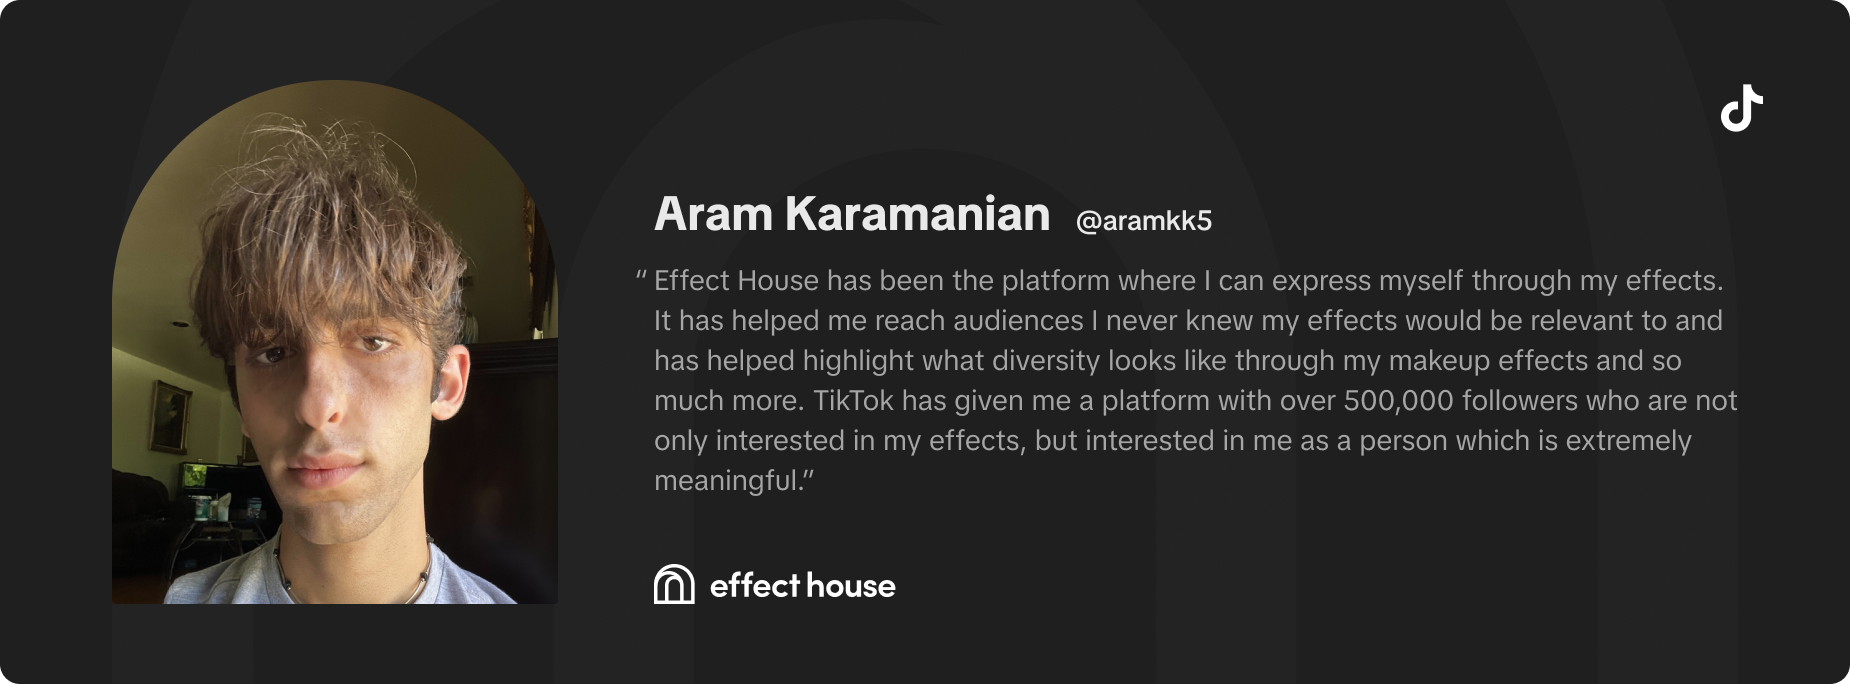 Effect House has been the platform where I can express myself through my effects. It has helped me reach audiences I never knew my effects would be relevant to and has helped highlight what diversity looks like through my makeup effects and so much more. TikTok has given me a platform with over 500,00 followers who are not only interested in my effects, but interested in me as a person which is extremely meaningful. -Aram Karamanian (@aramkk5)